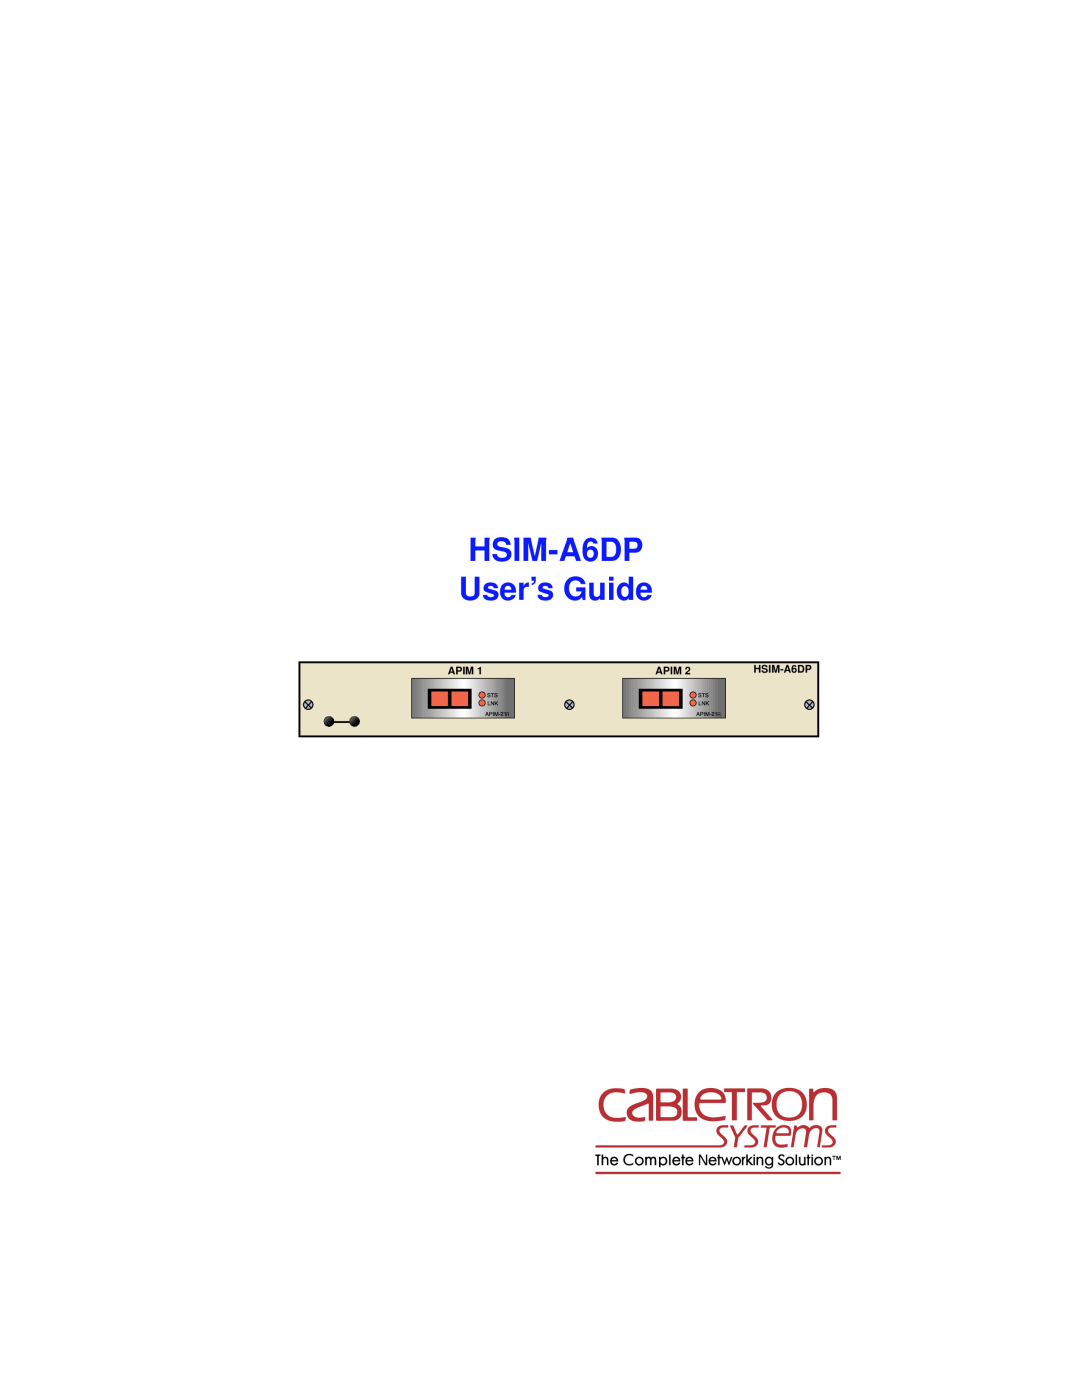 Cabletron Systems manual HSIM-A6DP User’s Guide, Apim 